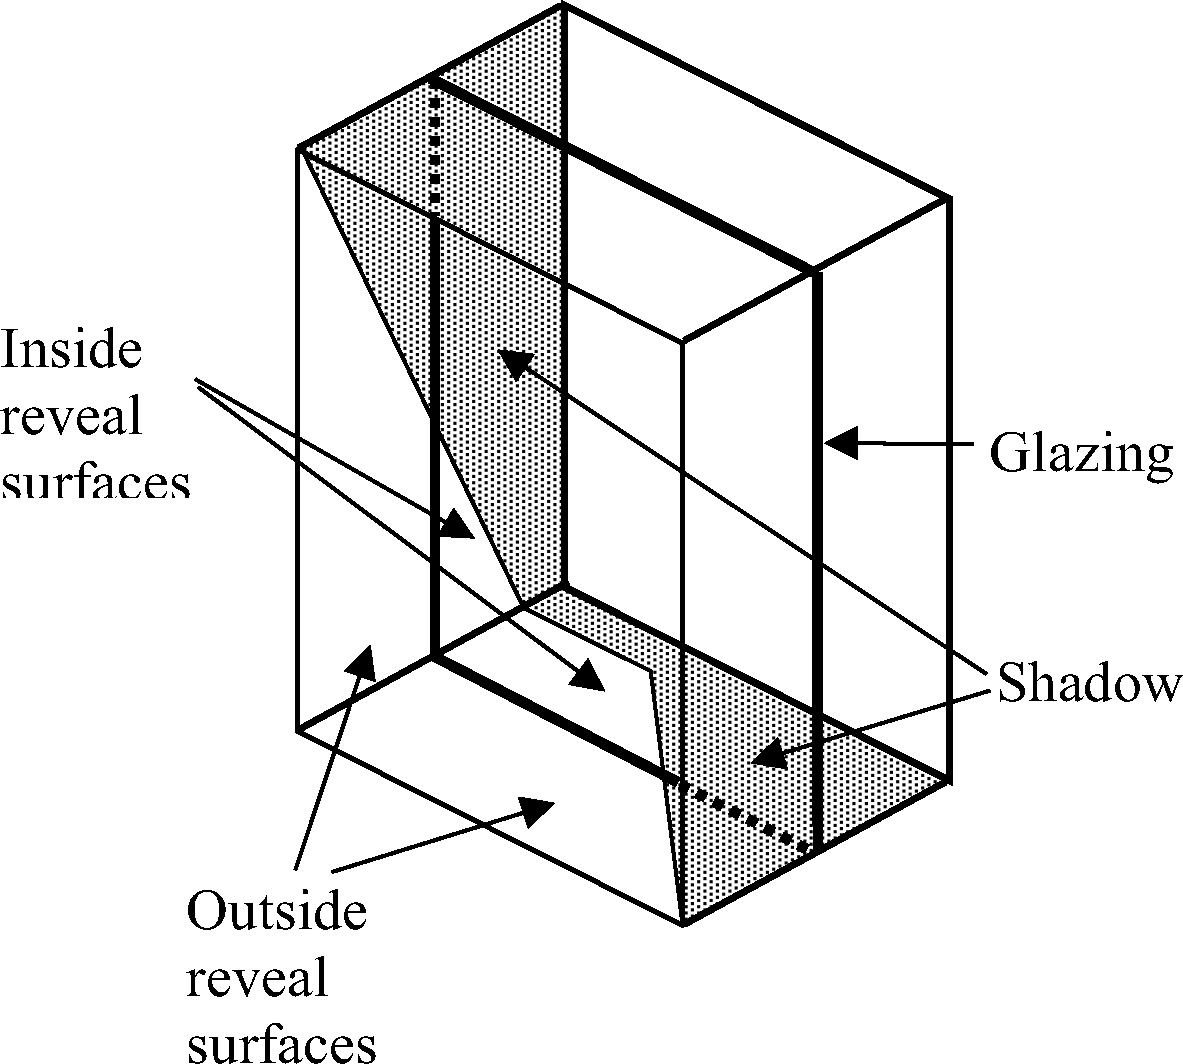 Example of shadowing of reveal surfaces by other reveal surfaces.